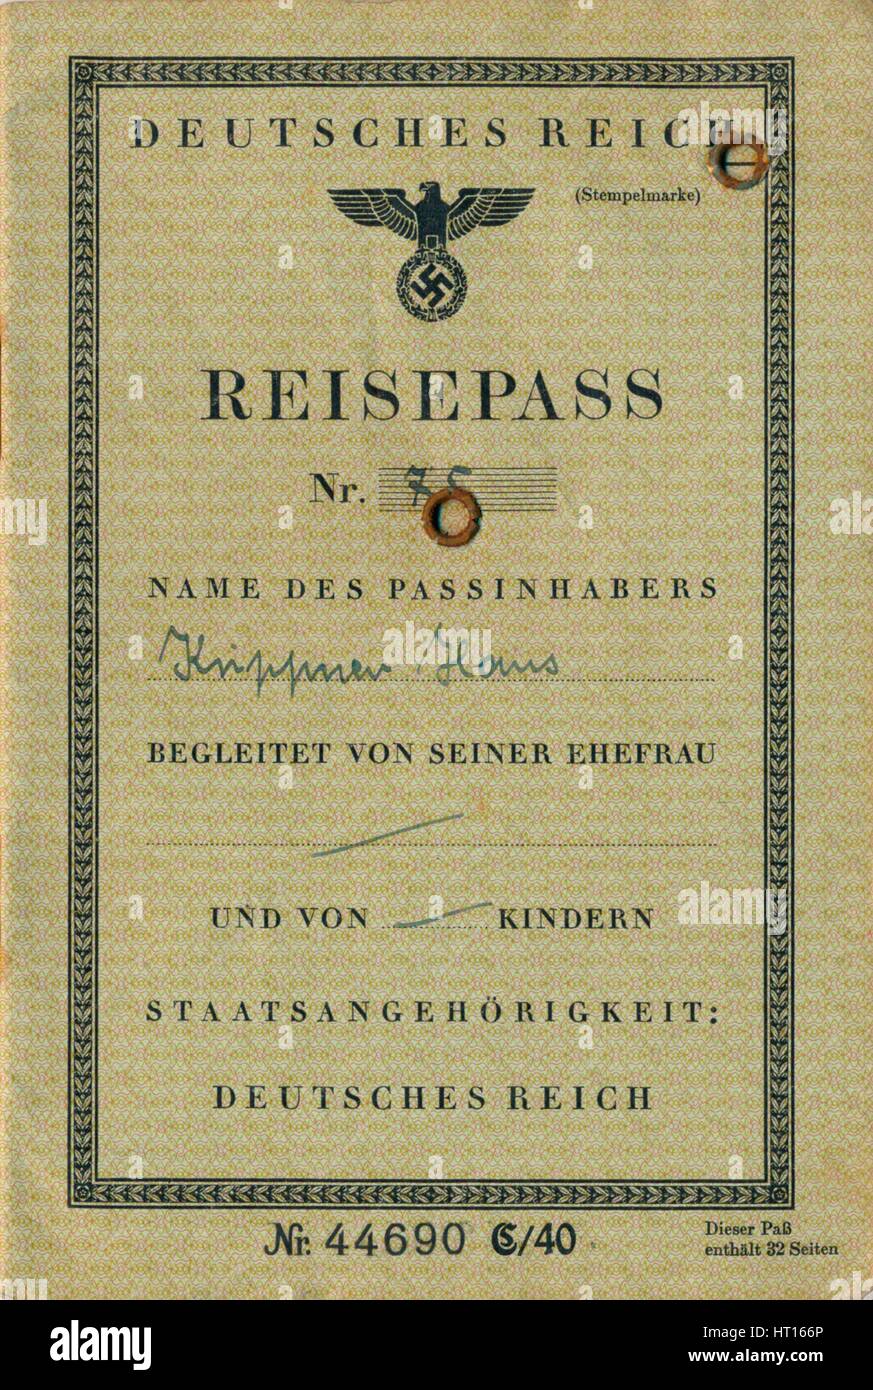 Inside page from a Nazi German passport, c1941. Artist: Unknown. Stock Photo